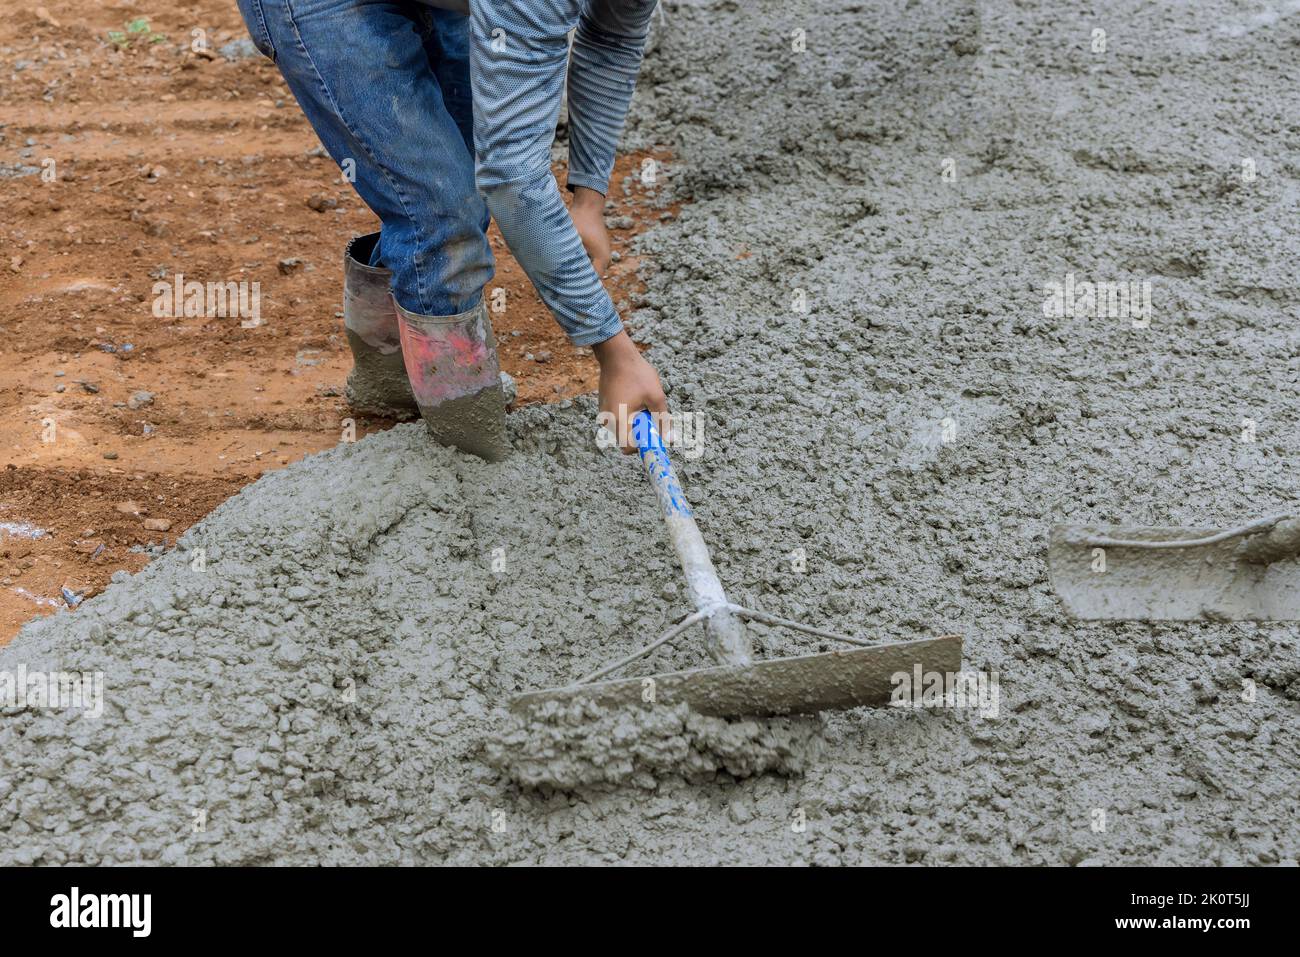 Pouring concrete for a car parking driveway is the work of a worker Stock Photo